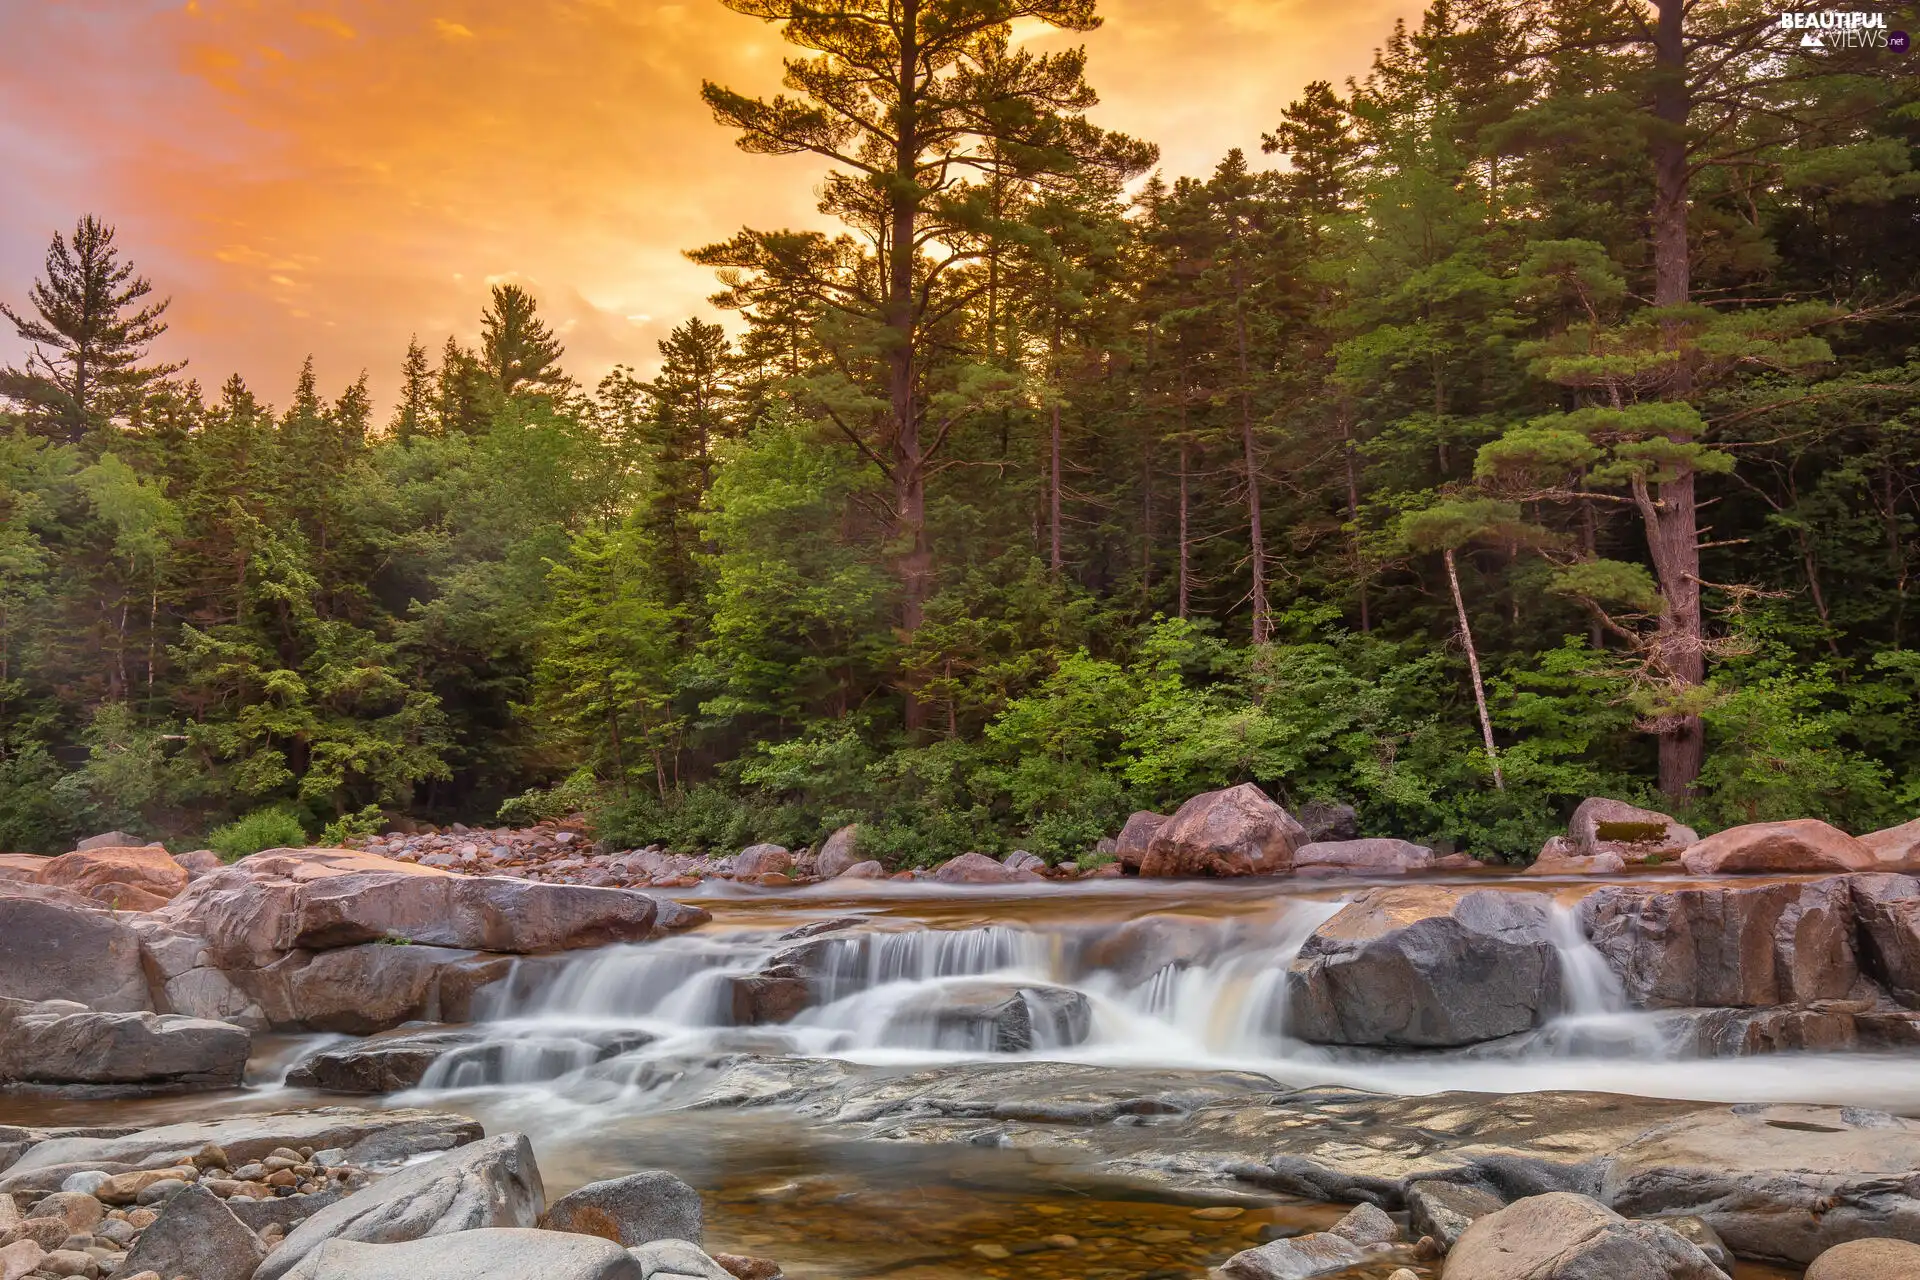 forest, boulders, viewes, Stones, River, trees, Great Sunsets